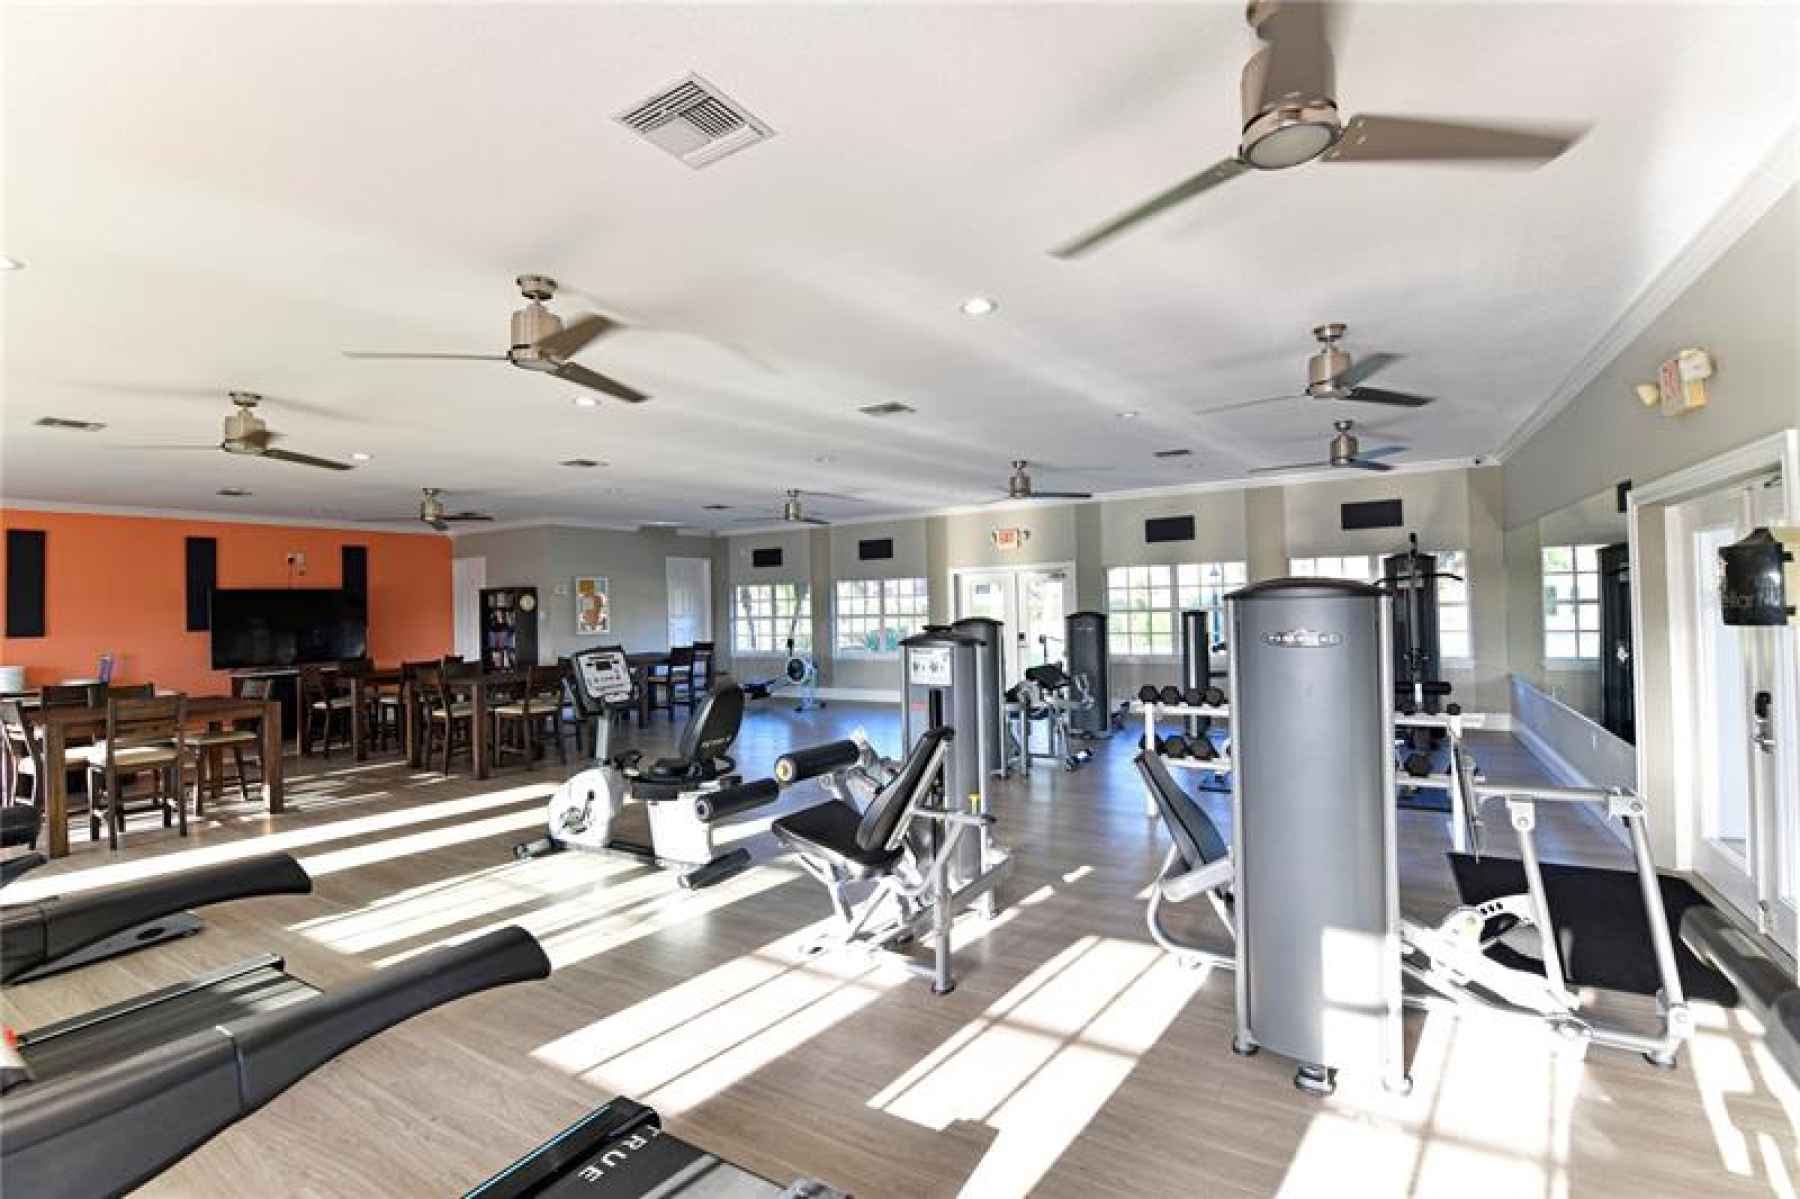 Clubhouse Fitness Center